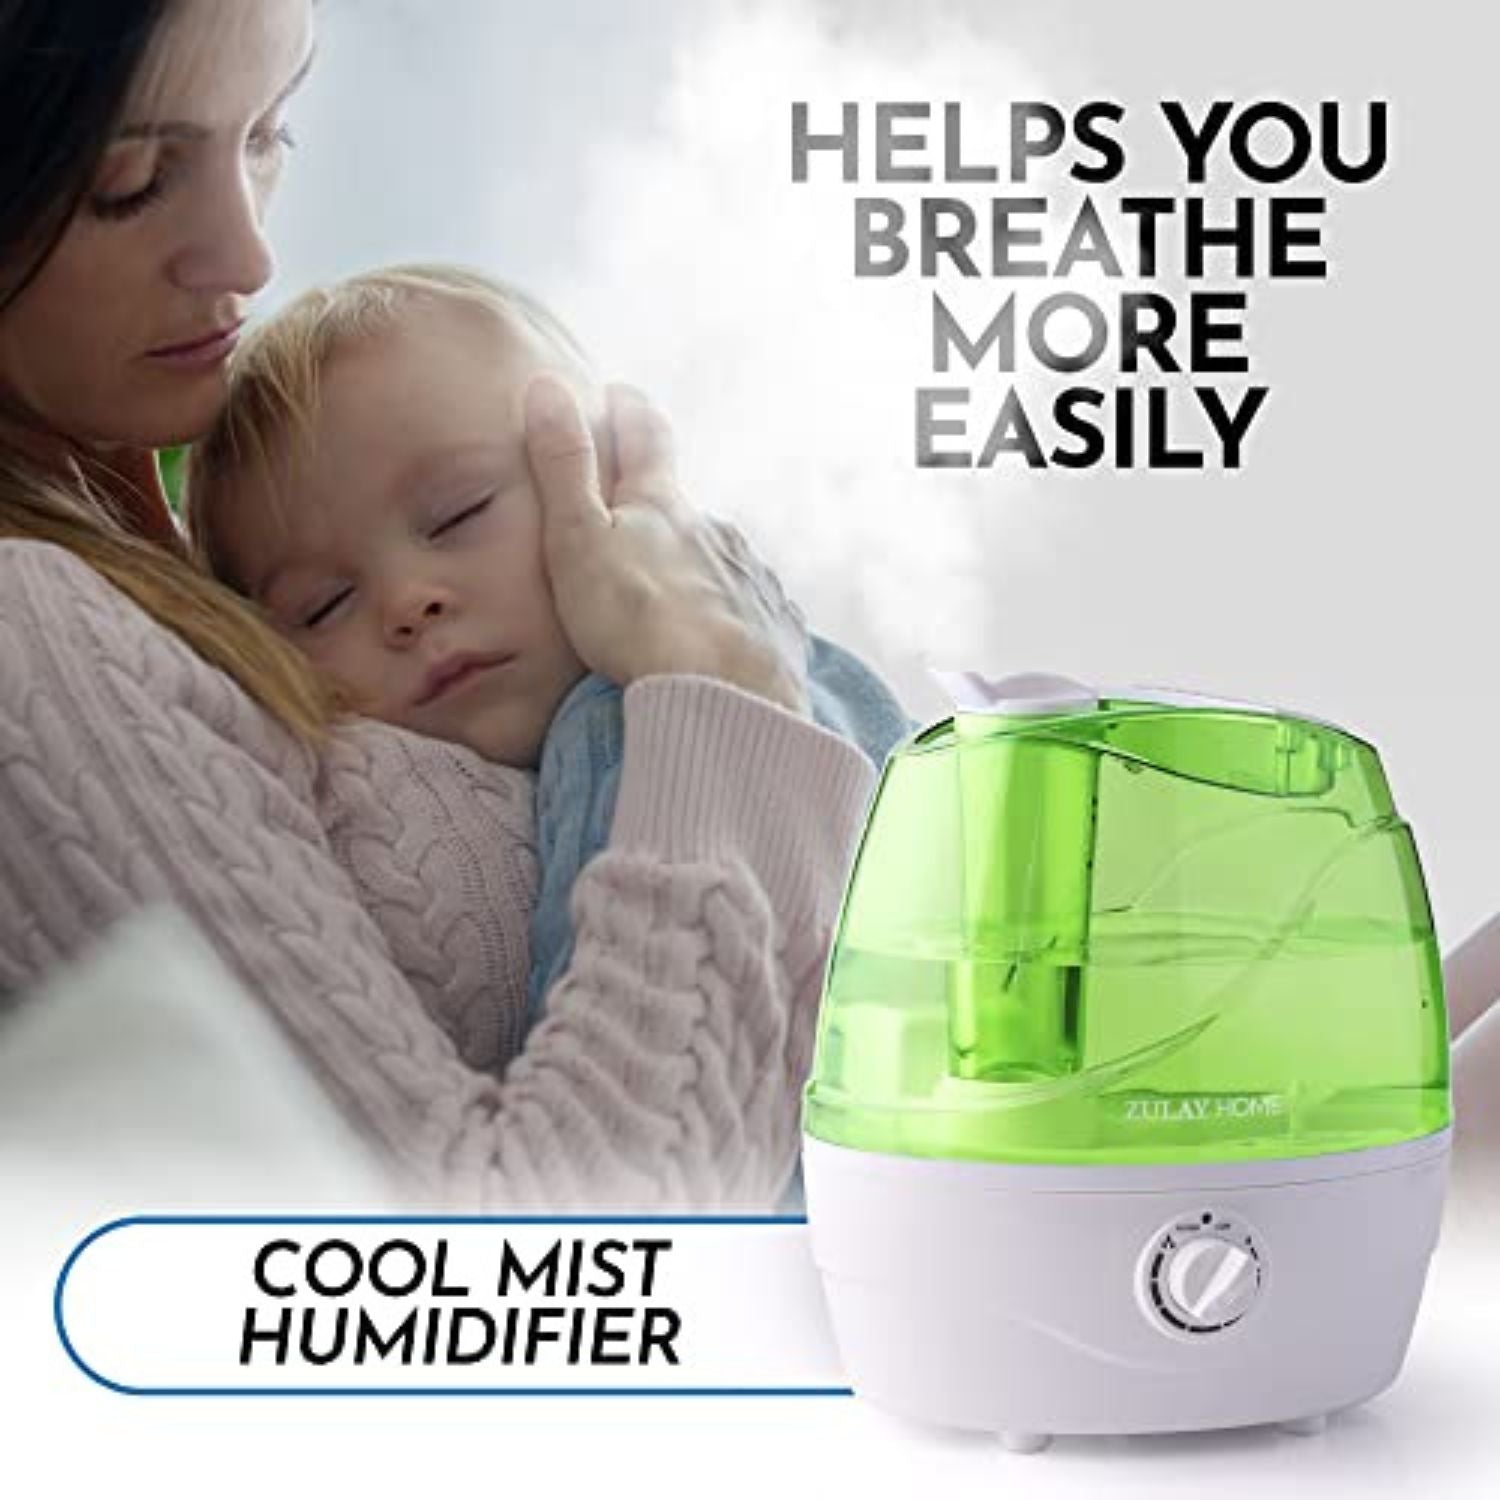 This portable humidifier operates with noise levels as low as 30db